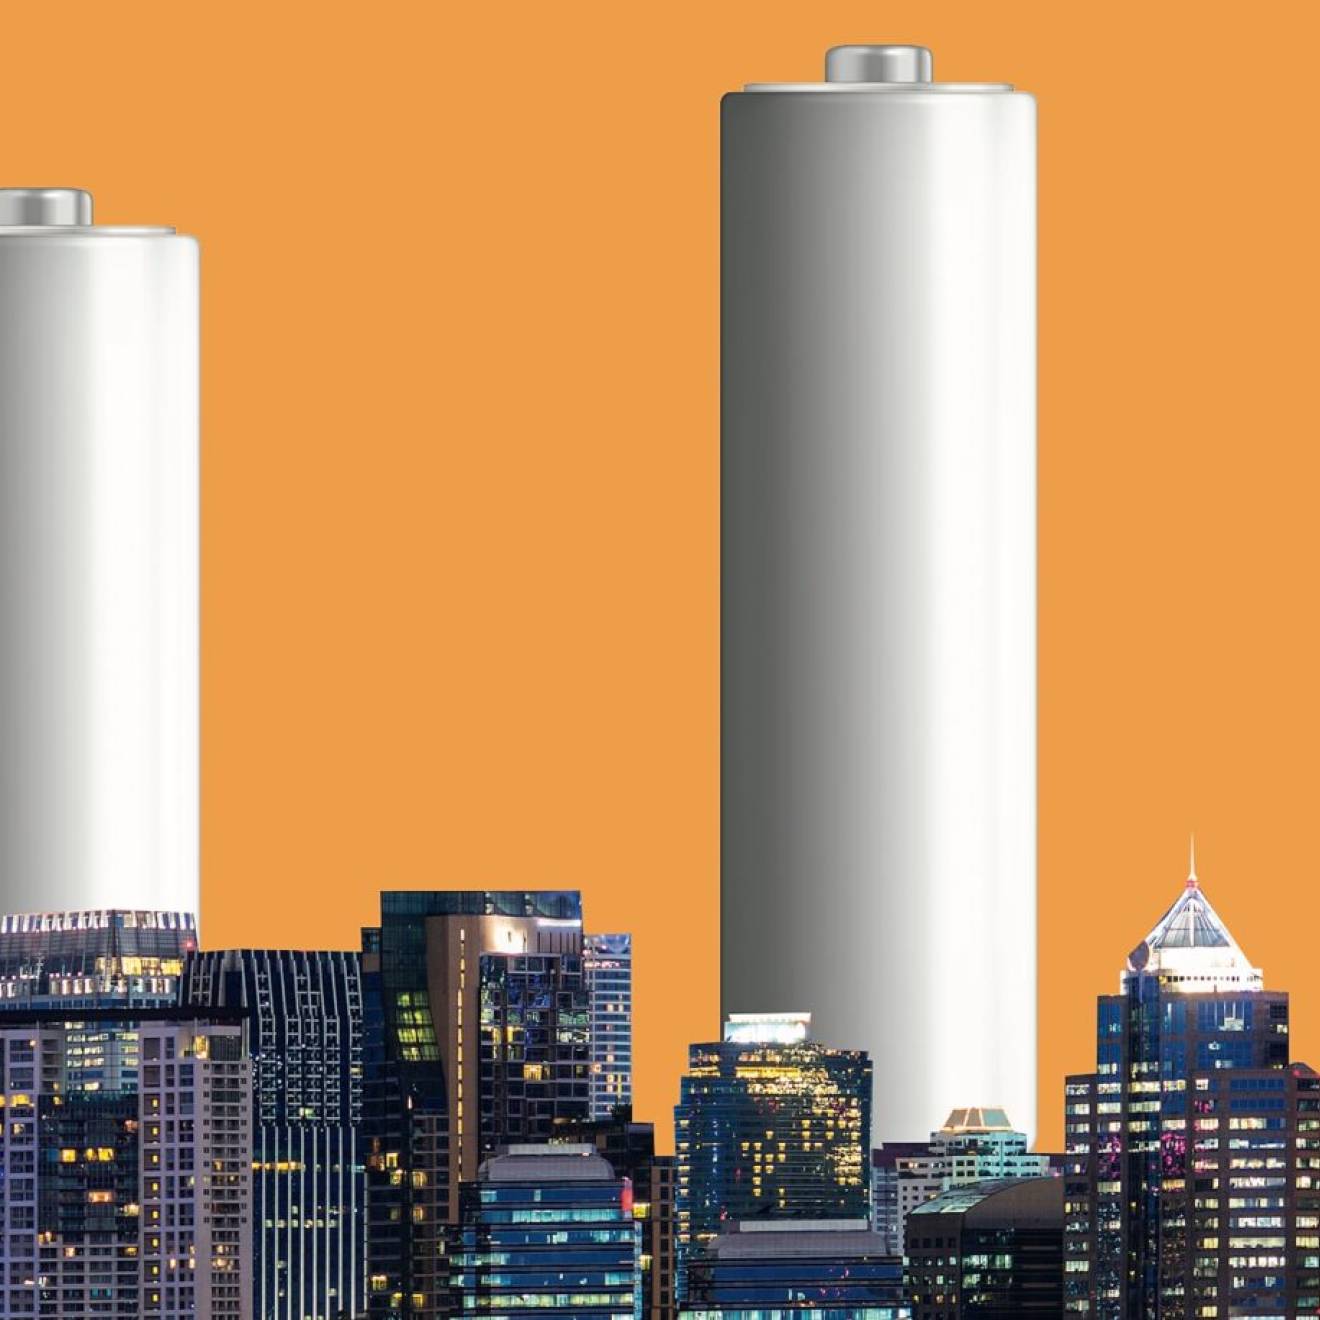 A city skyline with two batteries instead of skyscrapers among the skyscrapers